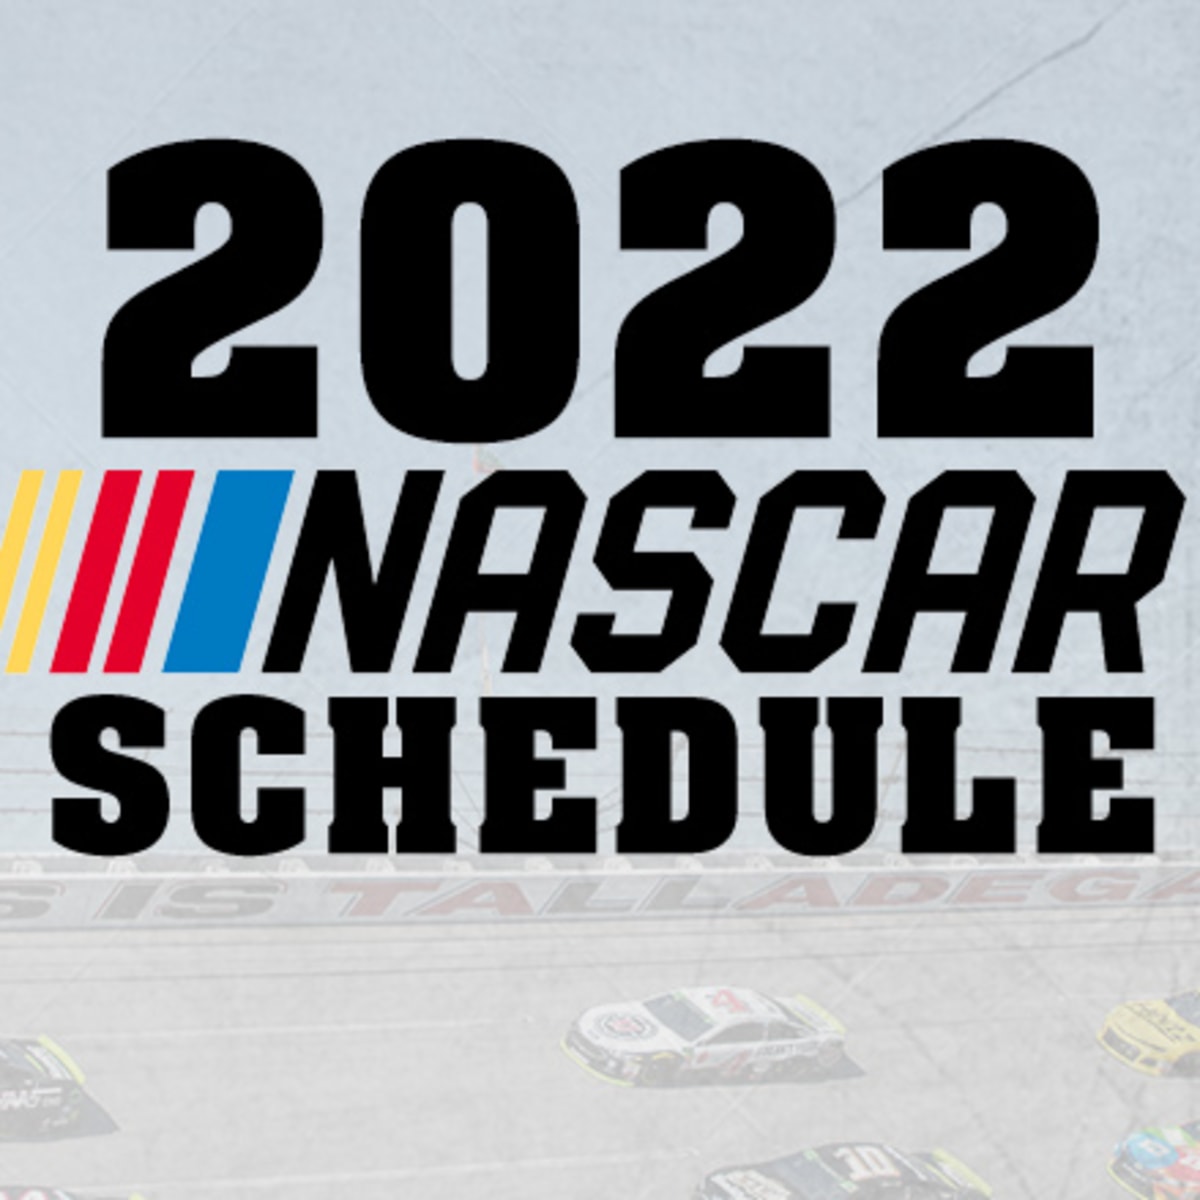 Nascar Cup Schedule 2022 2022 Nascar Schedule: Nascar Cup Series - Athlonsports.com | Expert  Predictions, Picks, And Previews